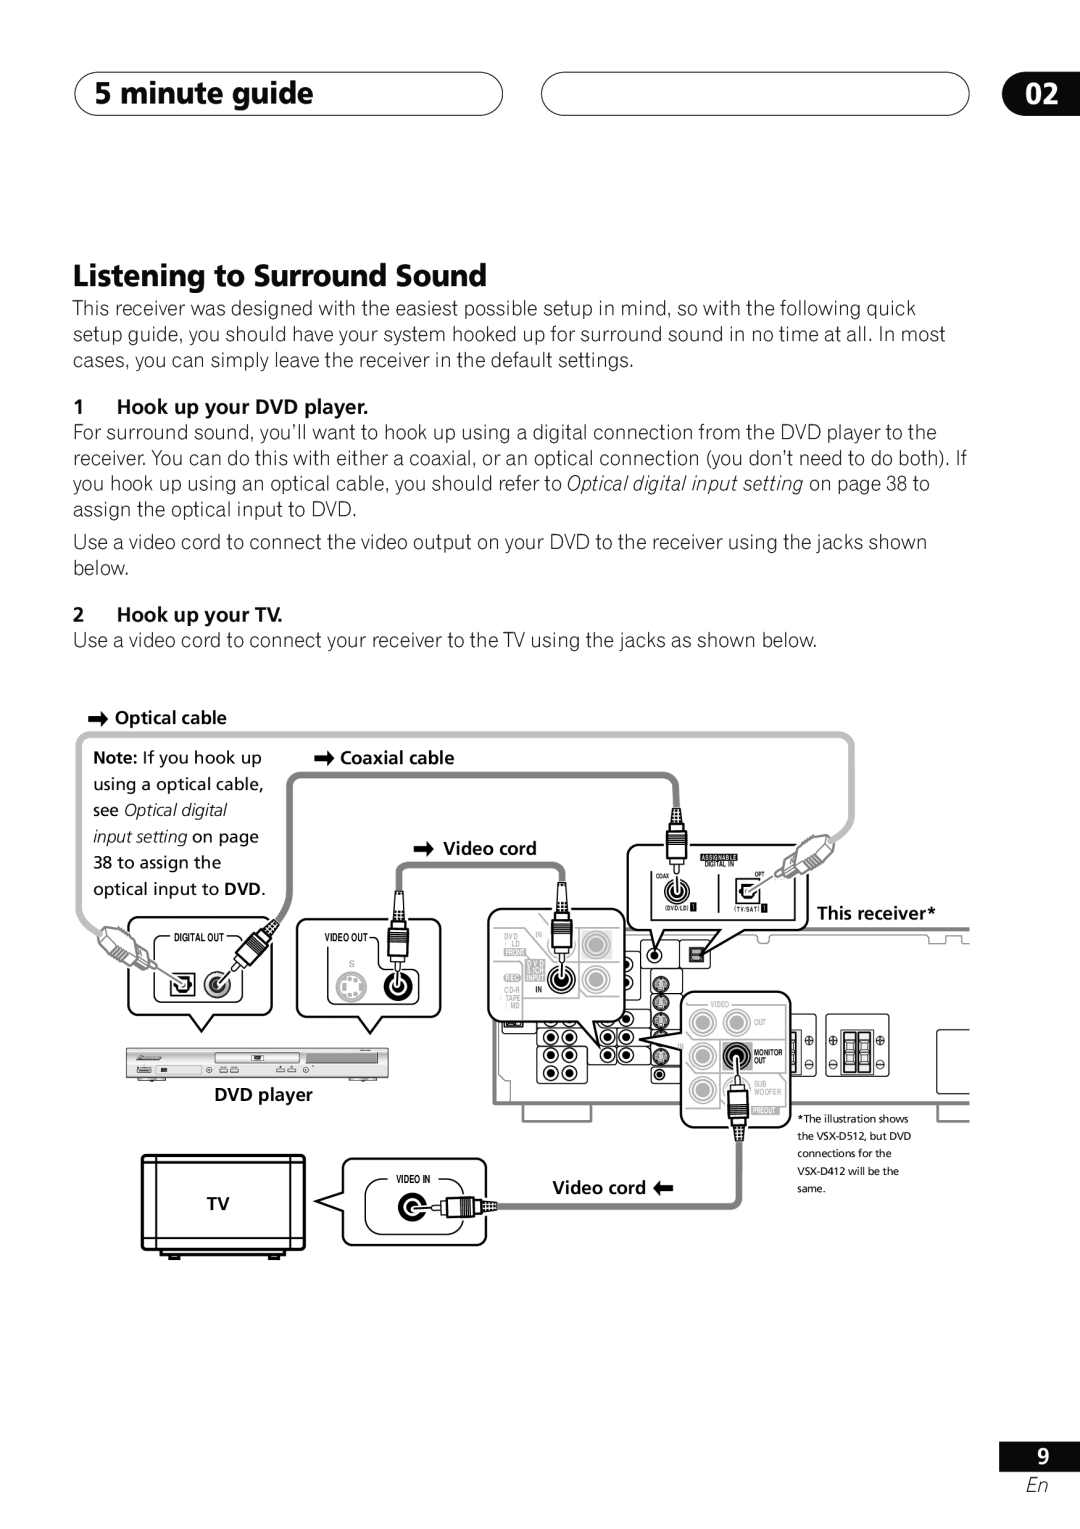 Pioneer vsx-d412 manual minute guide, Listening to Surround Sound, Hook up your DVD player, Hook up your TV 